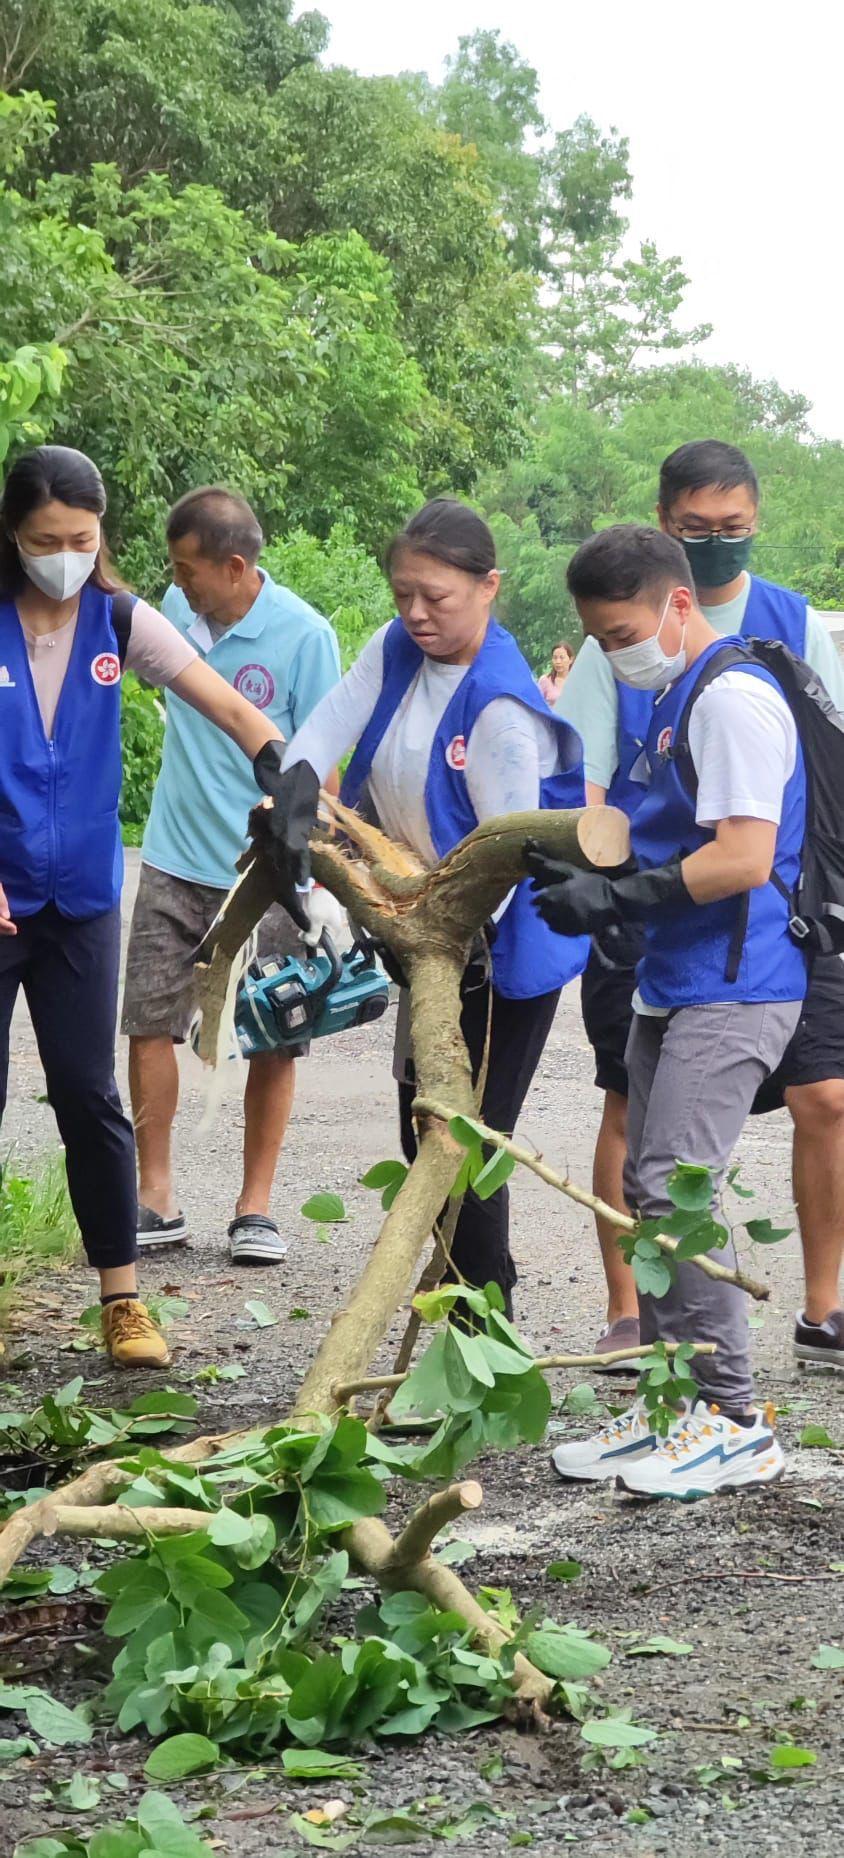 As Saola is moving away from Hong Kong, the Government has activated the "Government-wide mobilisation" level, mobilising about a hundred of staff members from different government departments promptly to form a quick response unit to provide assistance in several districts. Photo shows the District Officer, Miss Amy Yeung (second right), together with other government staff, carrying out clearance work to remove garbage and fallen branches and leaves on roads in Tung Chung Heung.